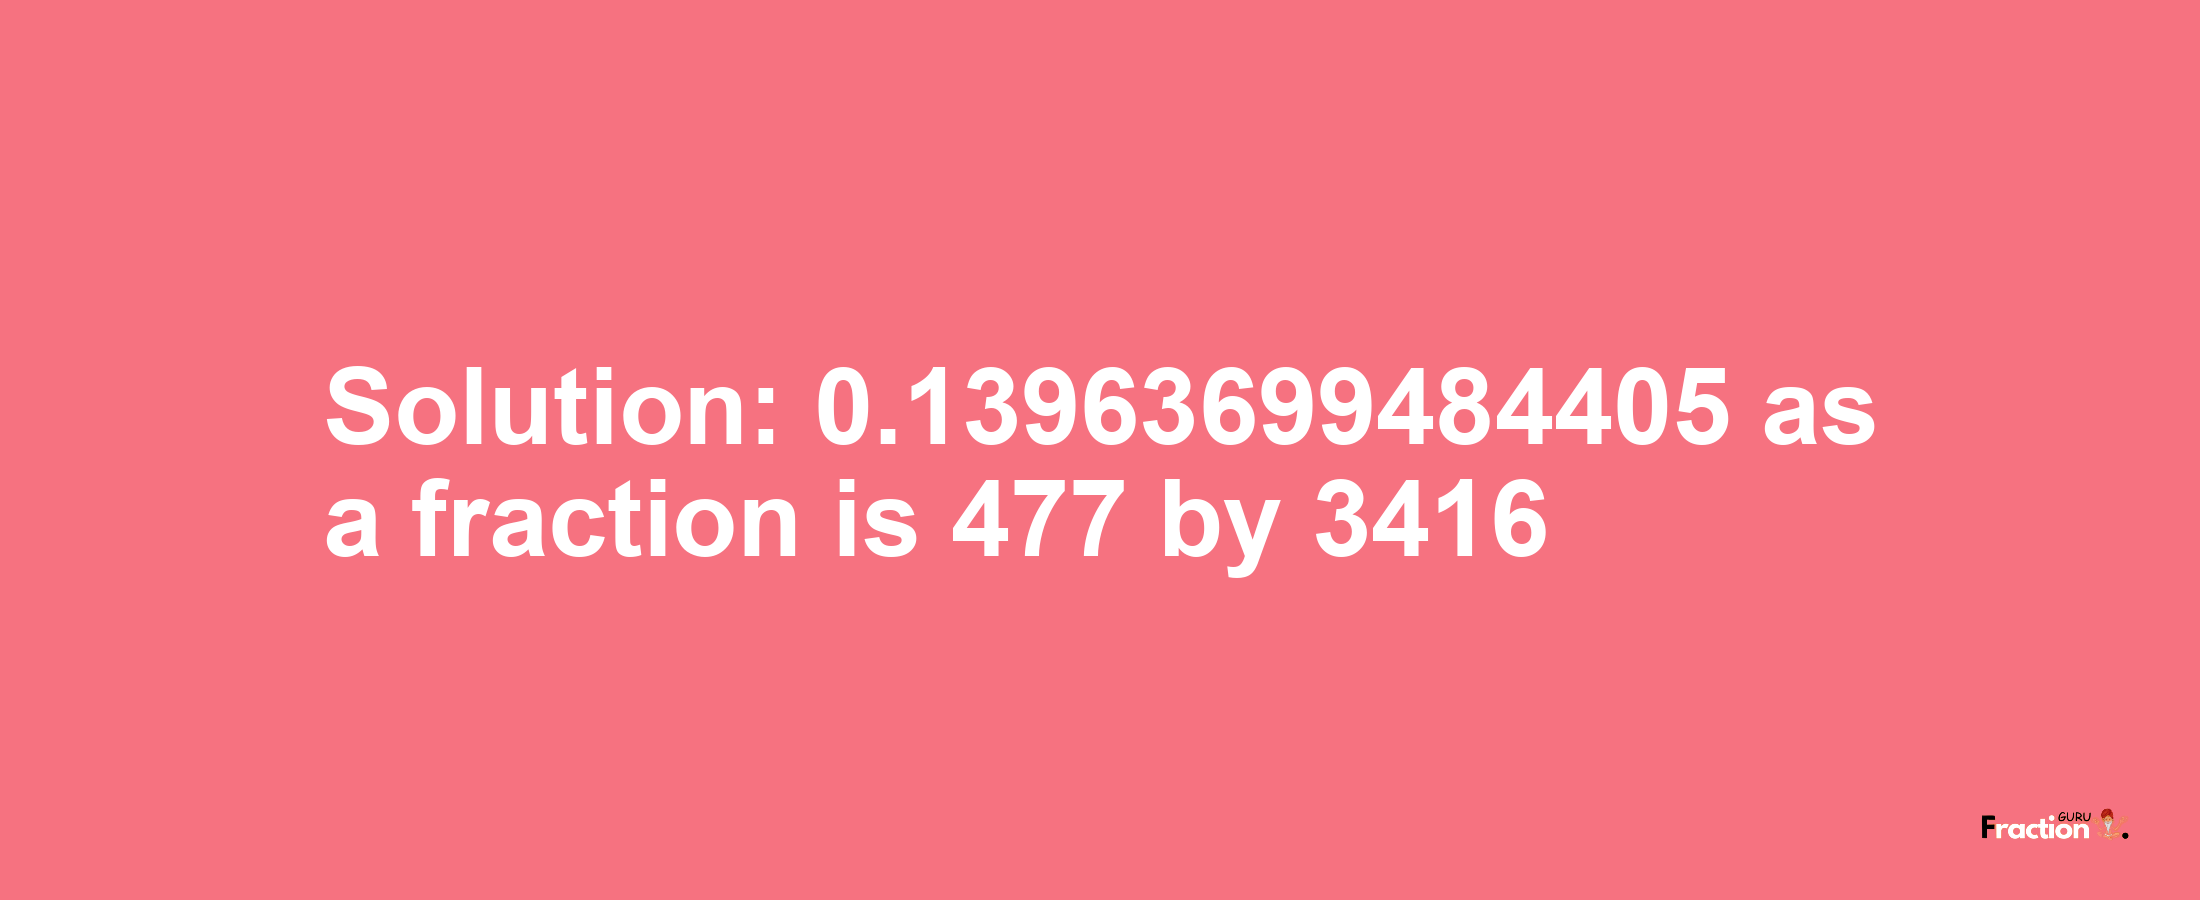 Solution:0.13963699484405 as a fraction is 477/3416